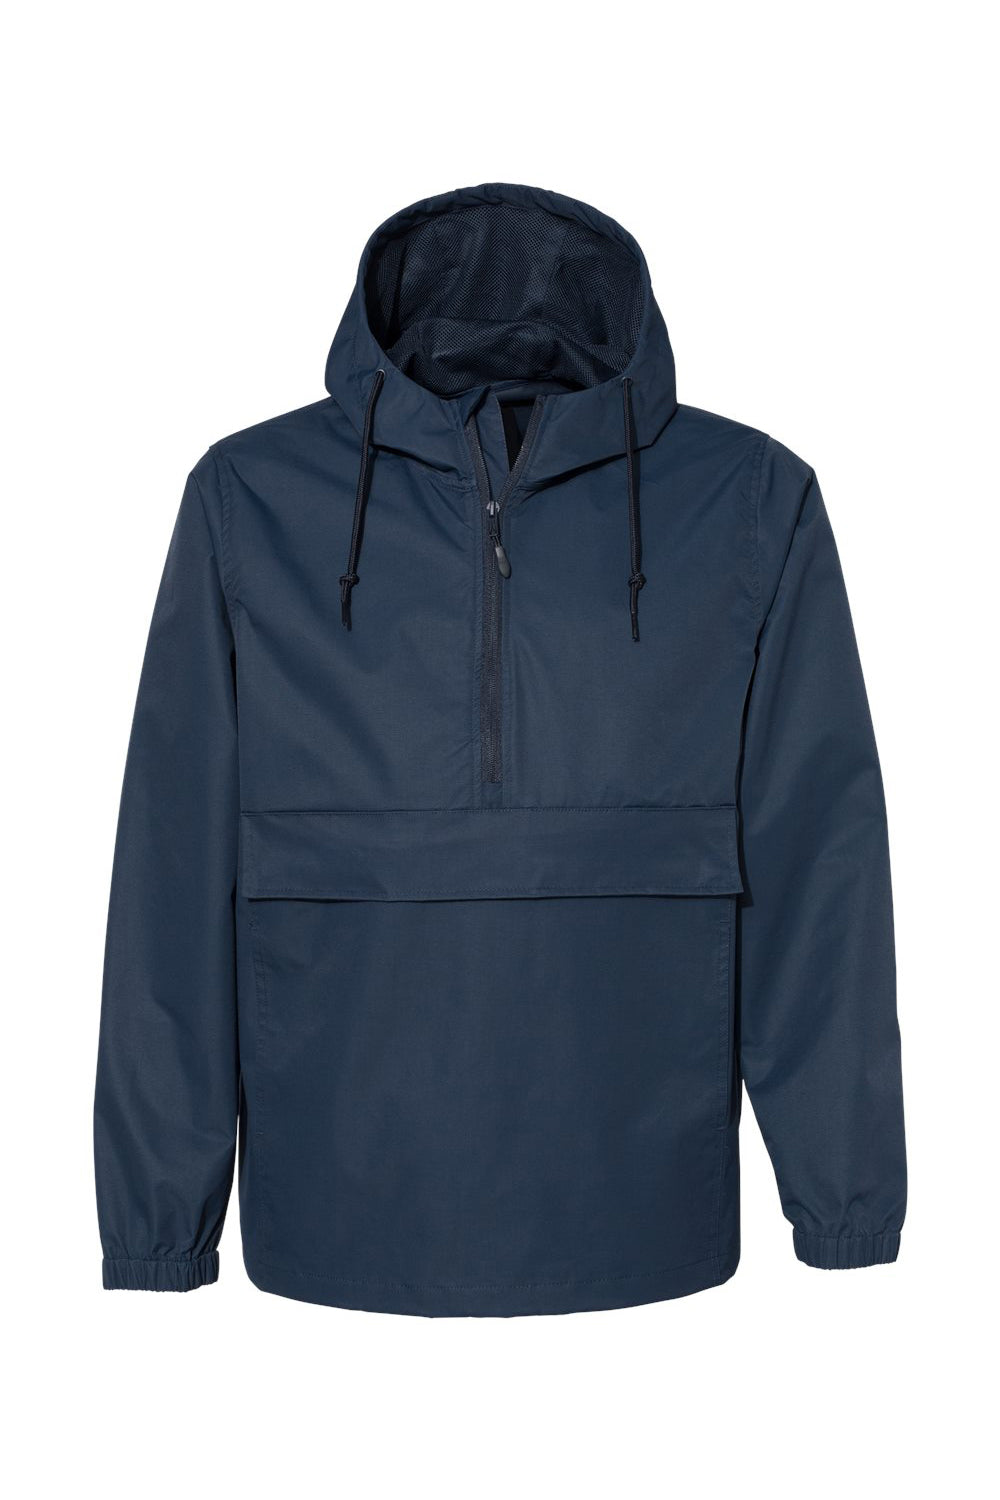 Independent Trading Co. EXP94NAW Mens Nylon Hooded Anorak Jacket Classic Navy Blue Flat Front